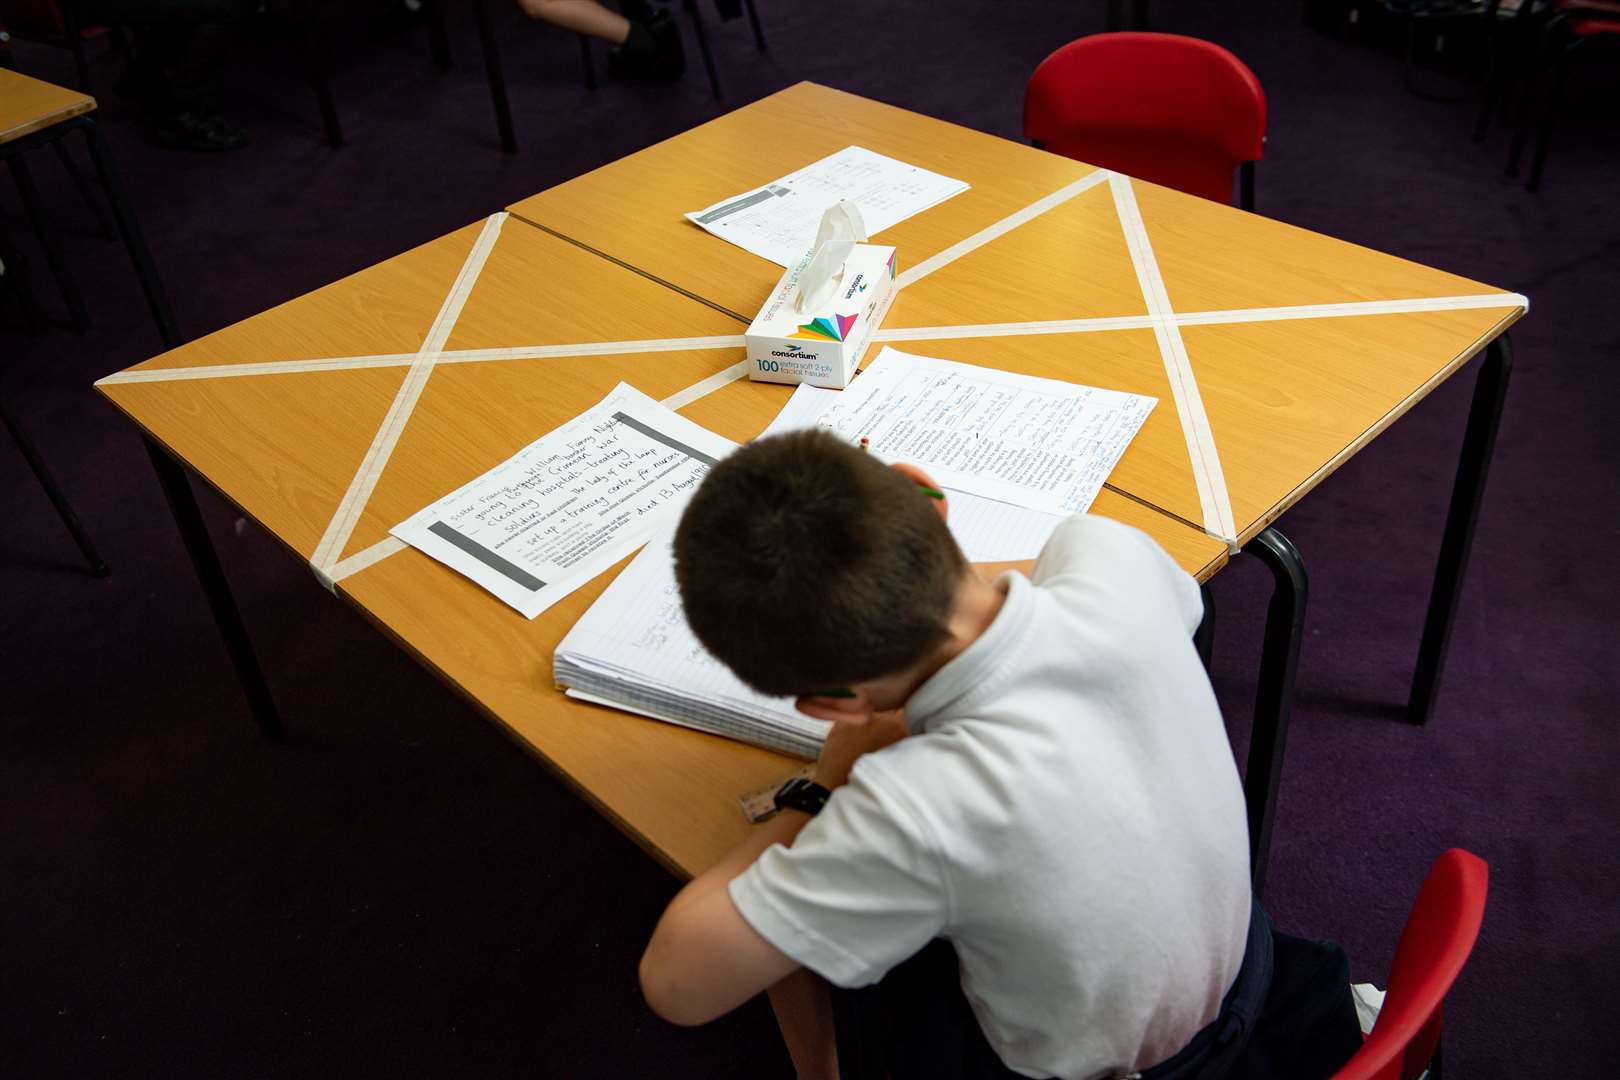 Reports suggest the Prime Minister wants social distancing restrictions reduced to help schools return in September (Jacob King/PA)